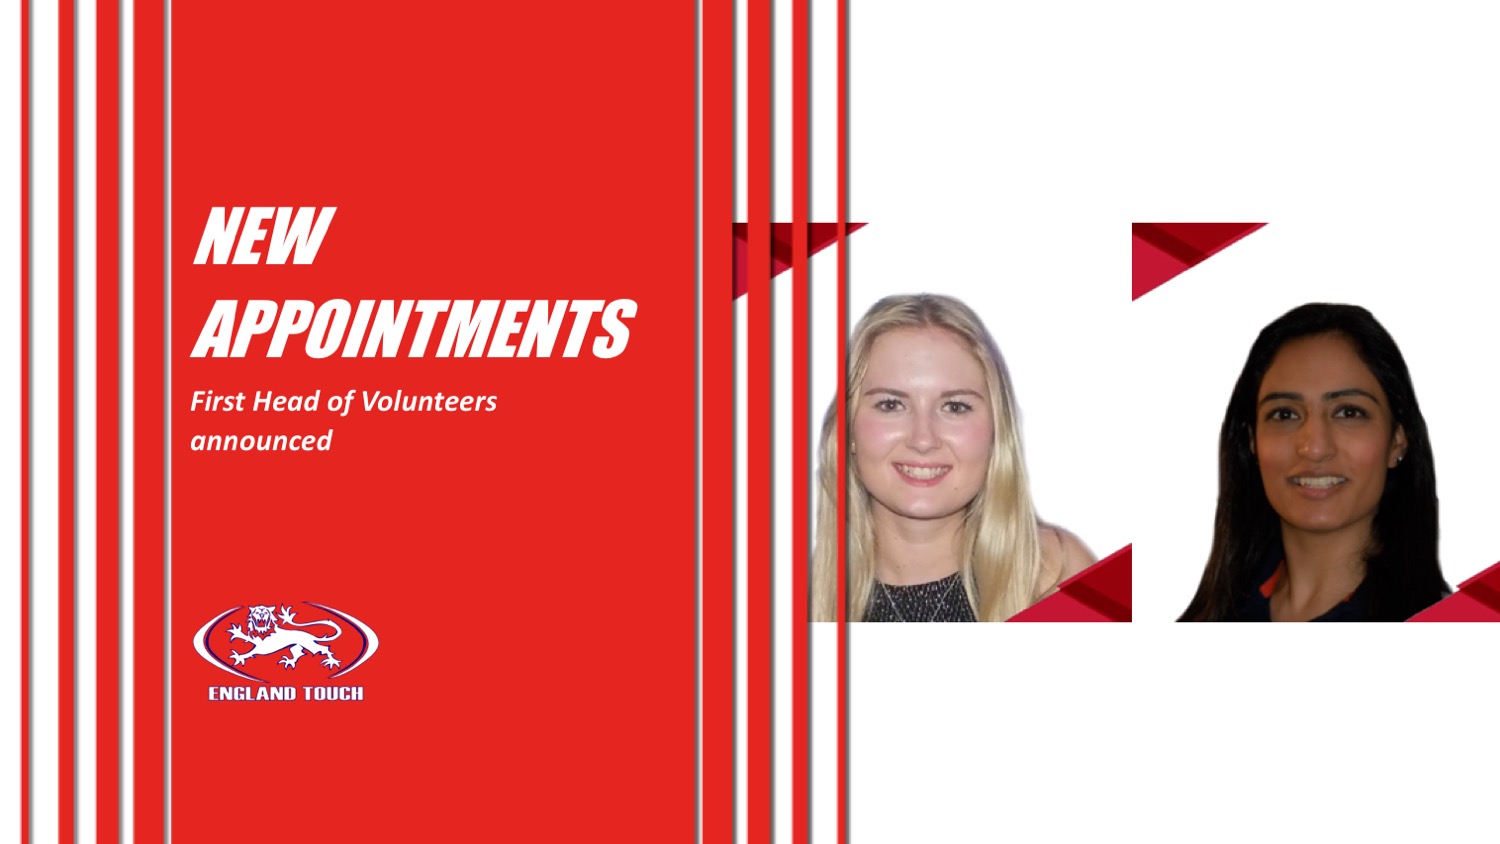 England Touch extending commitment to volunteer development